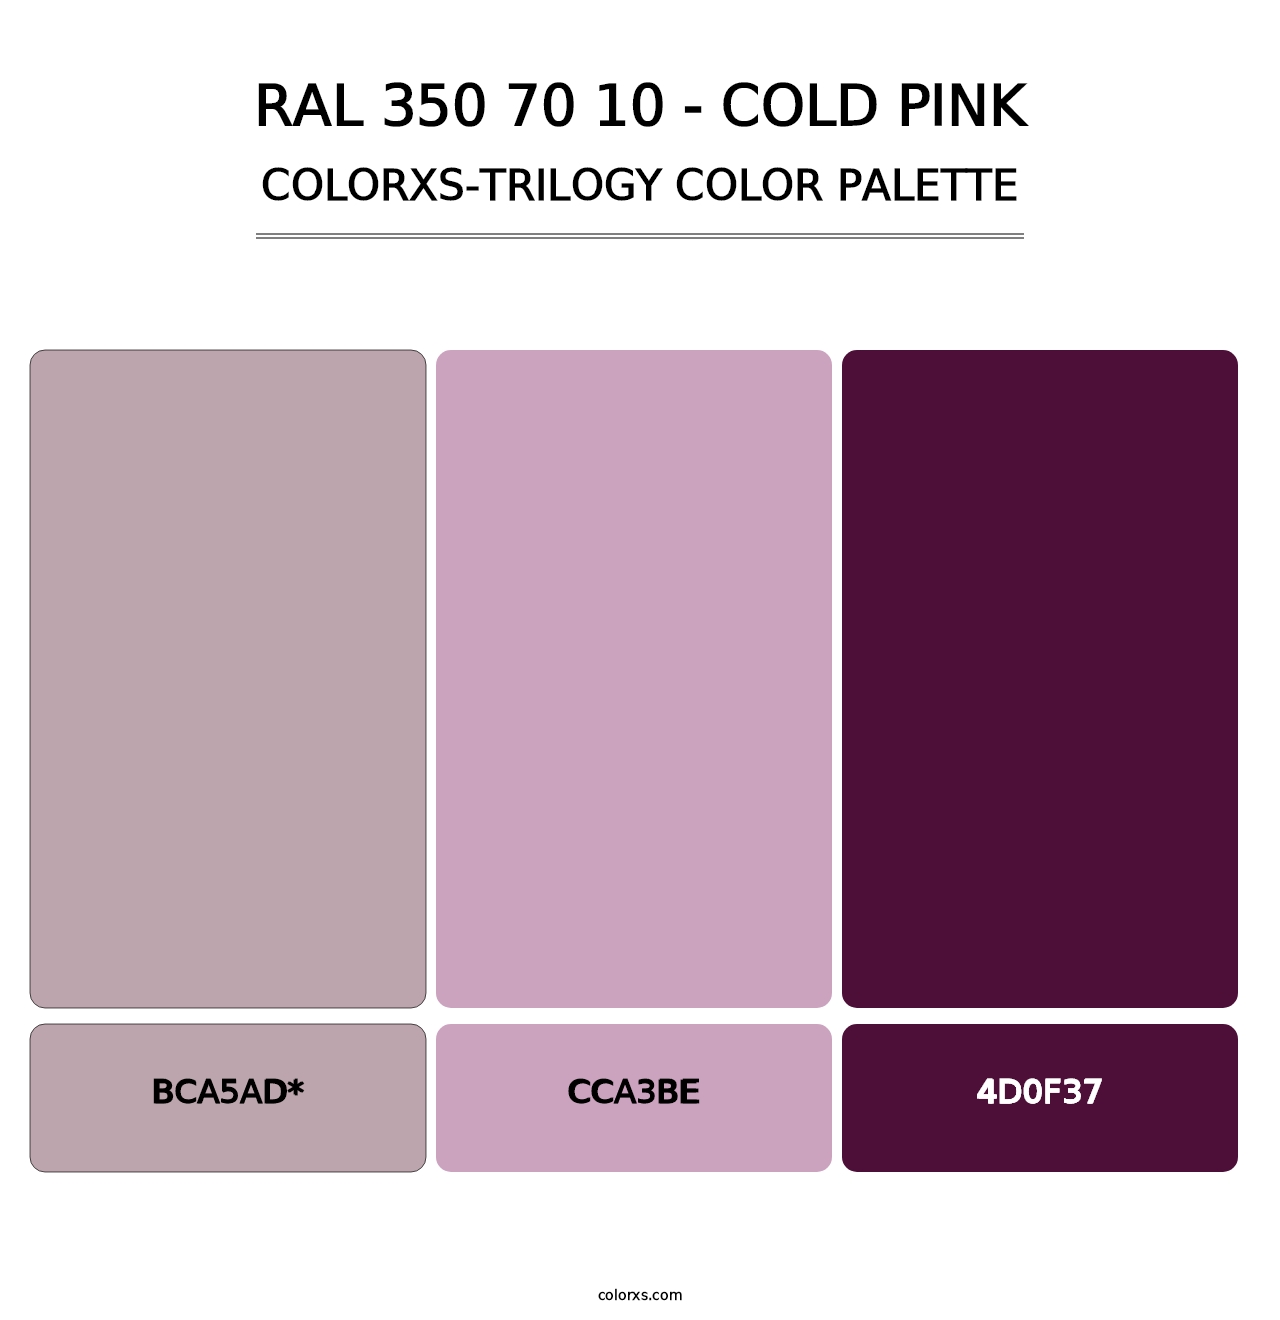 RAL 350 70 10 - Cold Pink - Colorxs Trilogy Palette